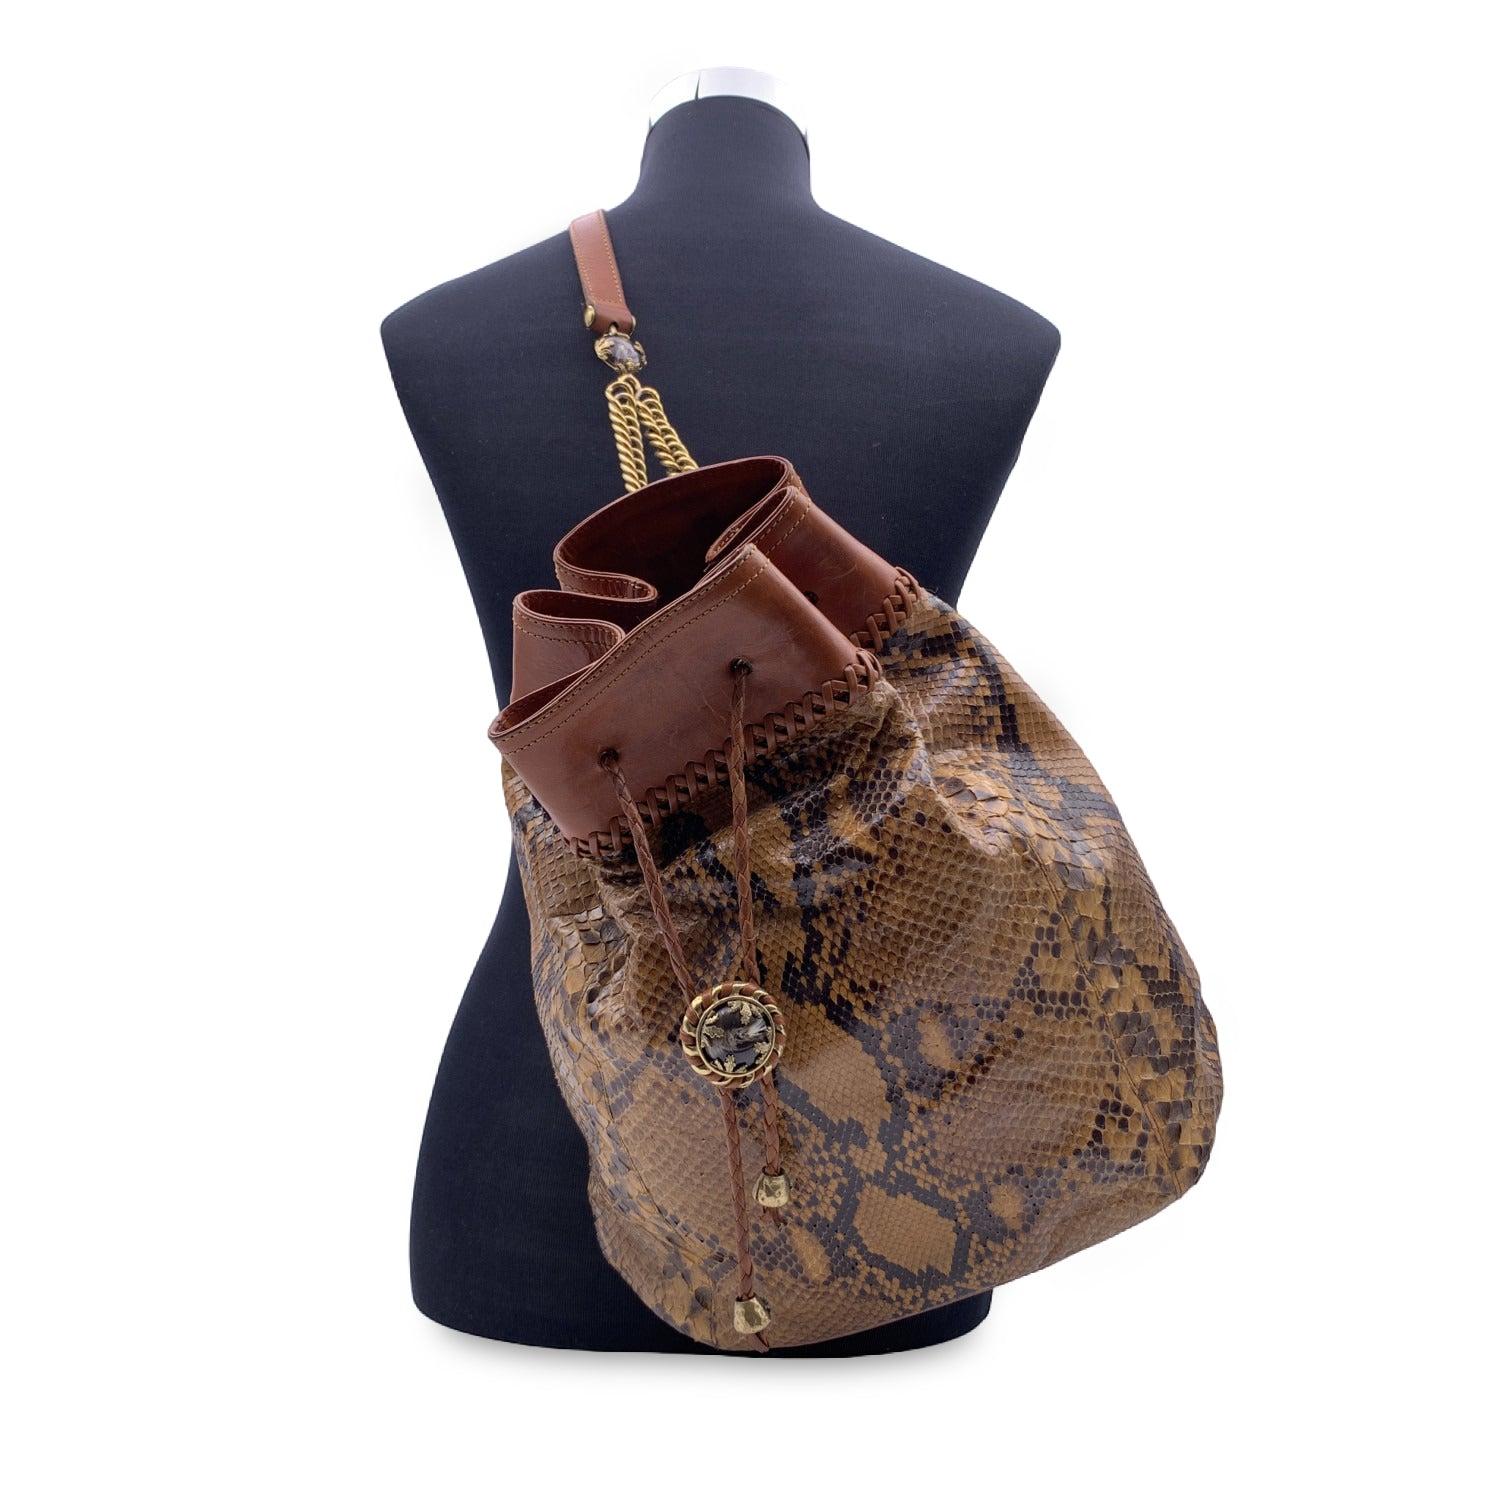 Vintage Ermanno Daelli drawstring bucket in brown leather. Drawstring closure on top. Single shoulder strap in leather with gold metal chain. Fabric lining. 1 side zip pocket inside. 'Ermanno Daelli' signature inside . Details MATERIAL: Leather